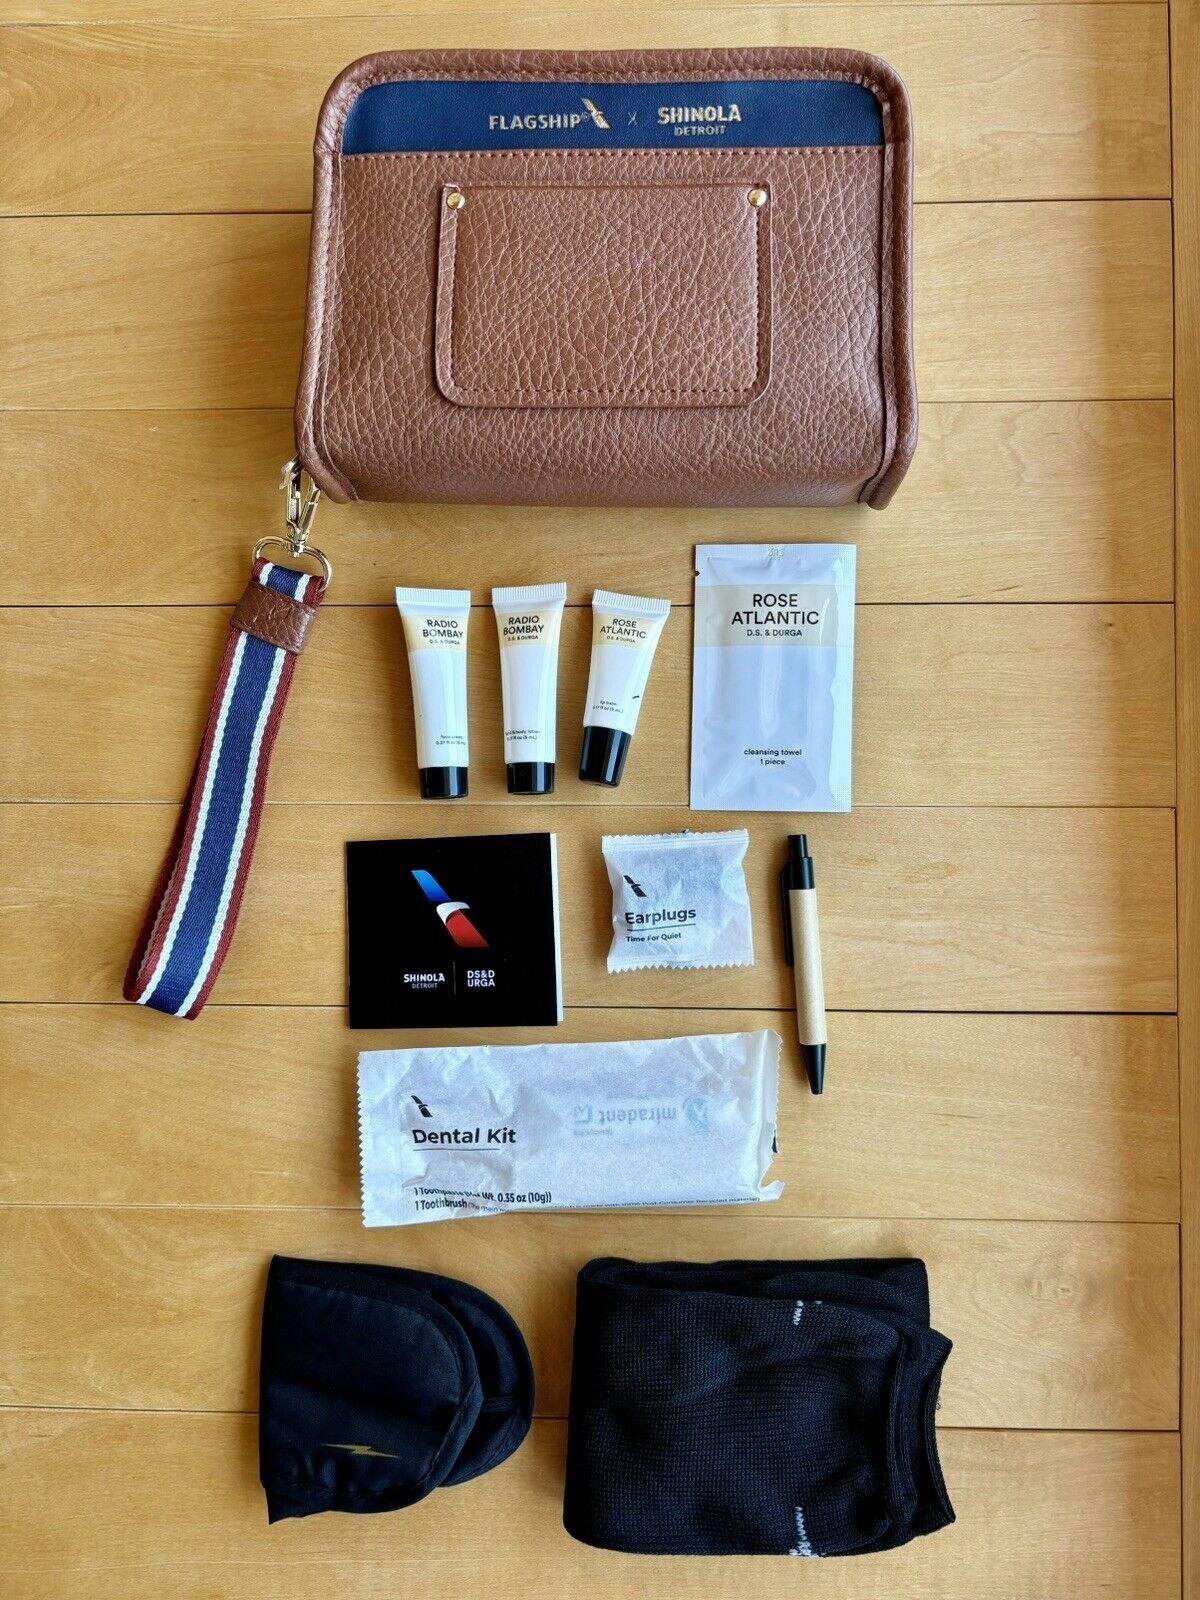 NEW American Airlines AA Flagship FIRST CLASS Amenity Kit by Shinola RARE